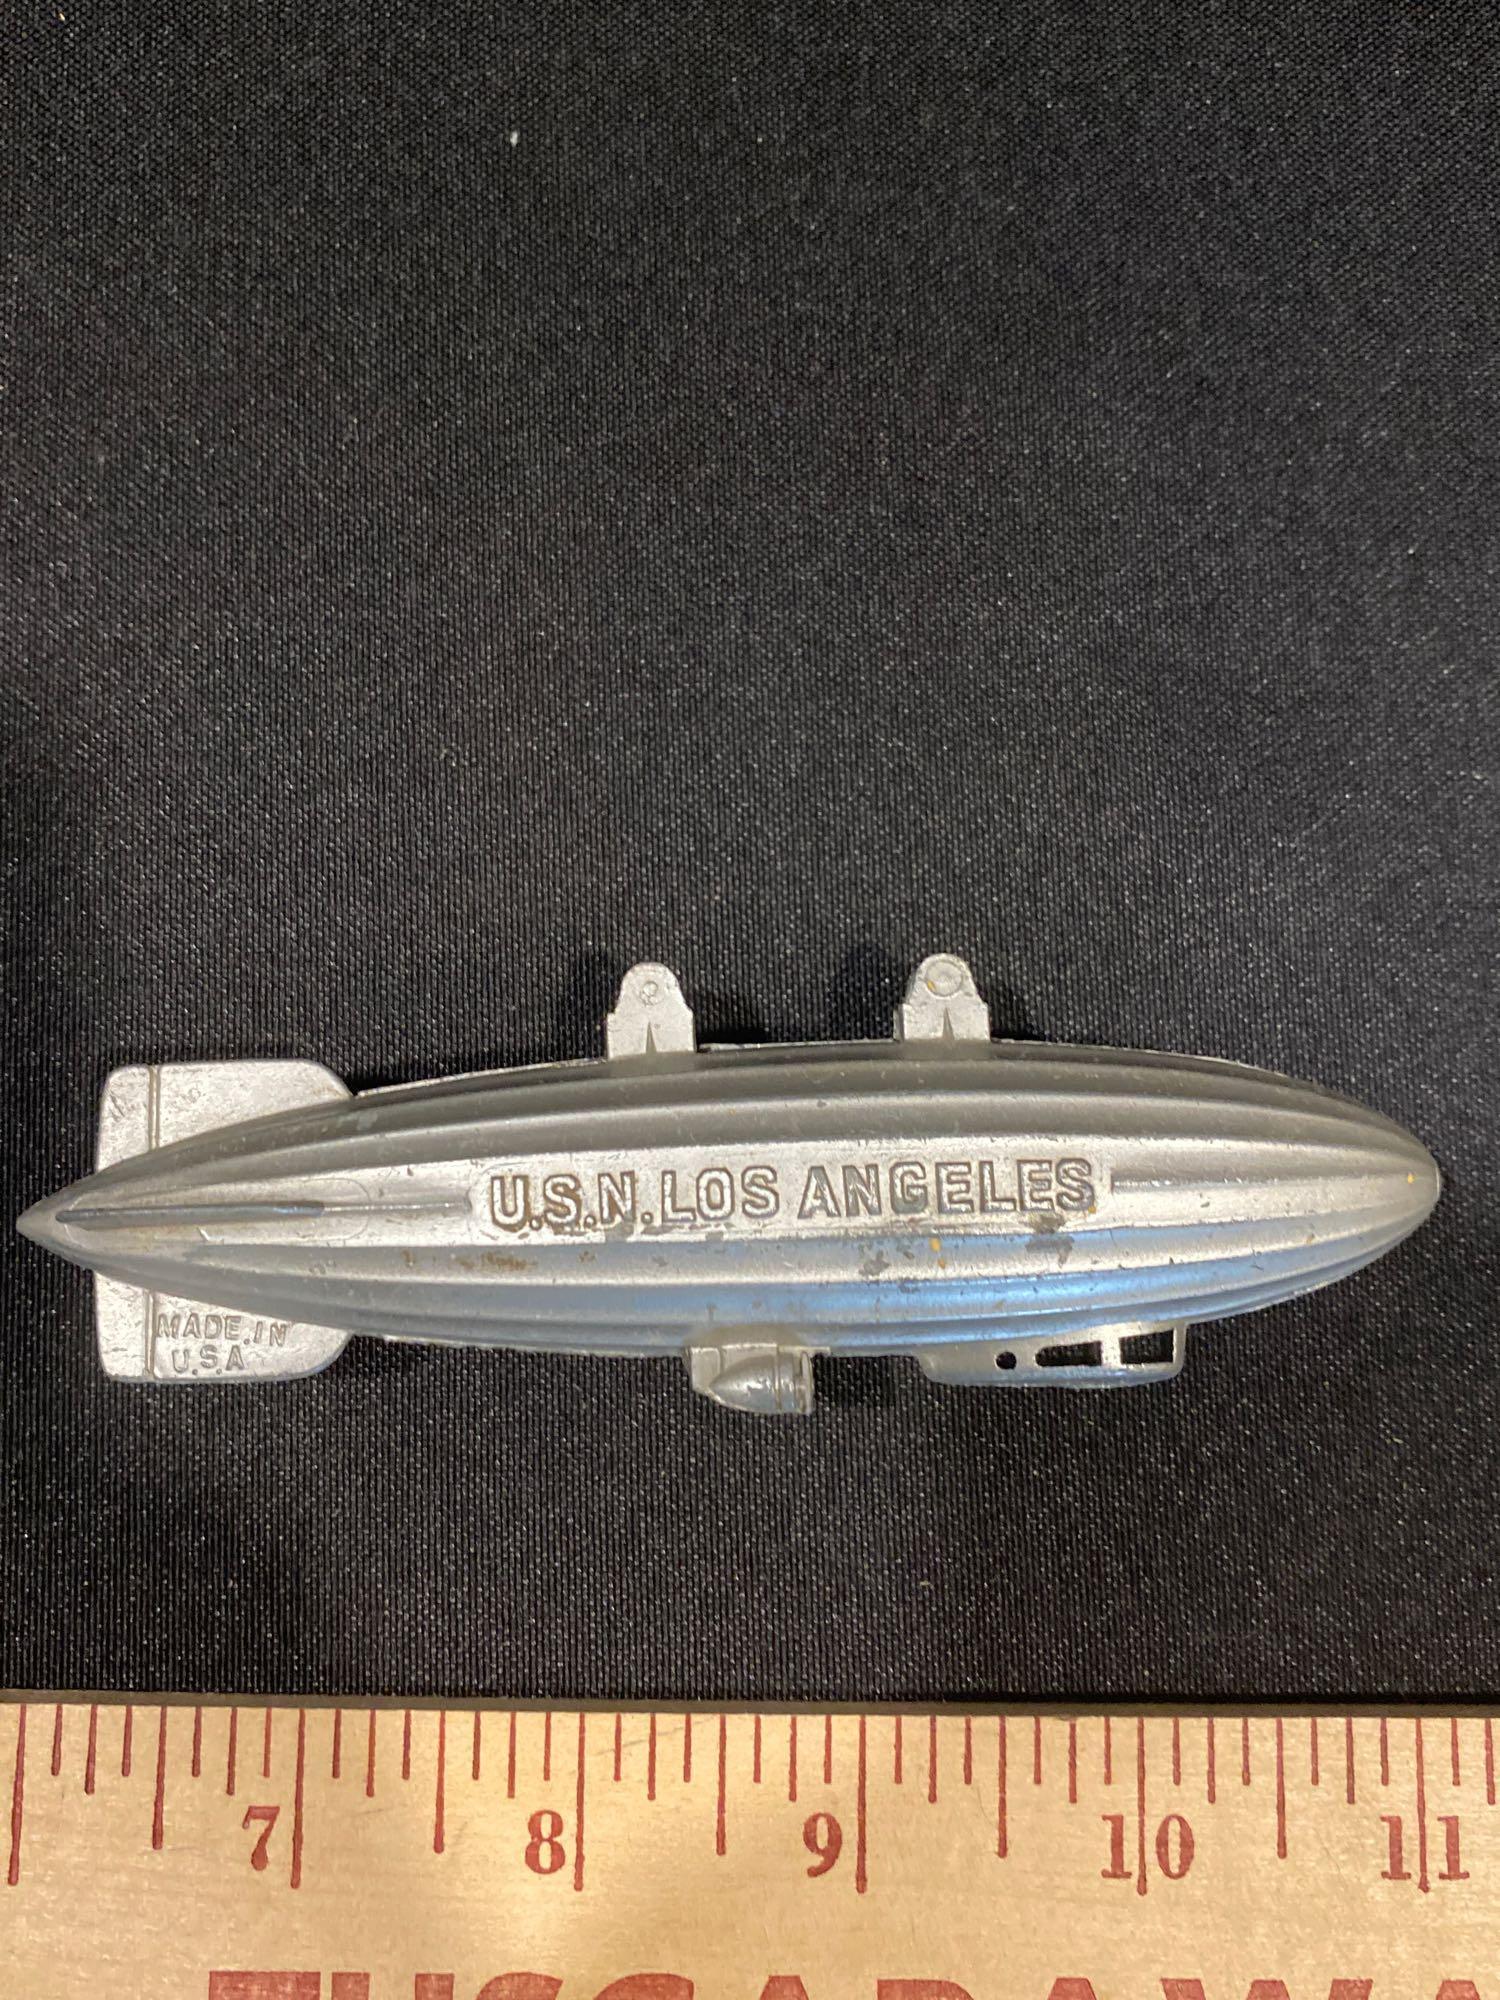 3 USN Los Angeles Zeppelin, airship, cable toys, Tootsietoys